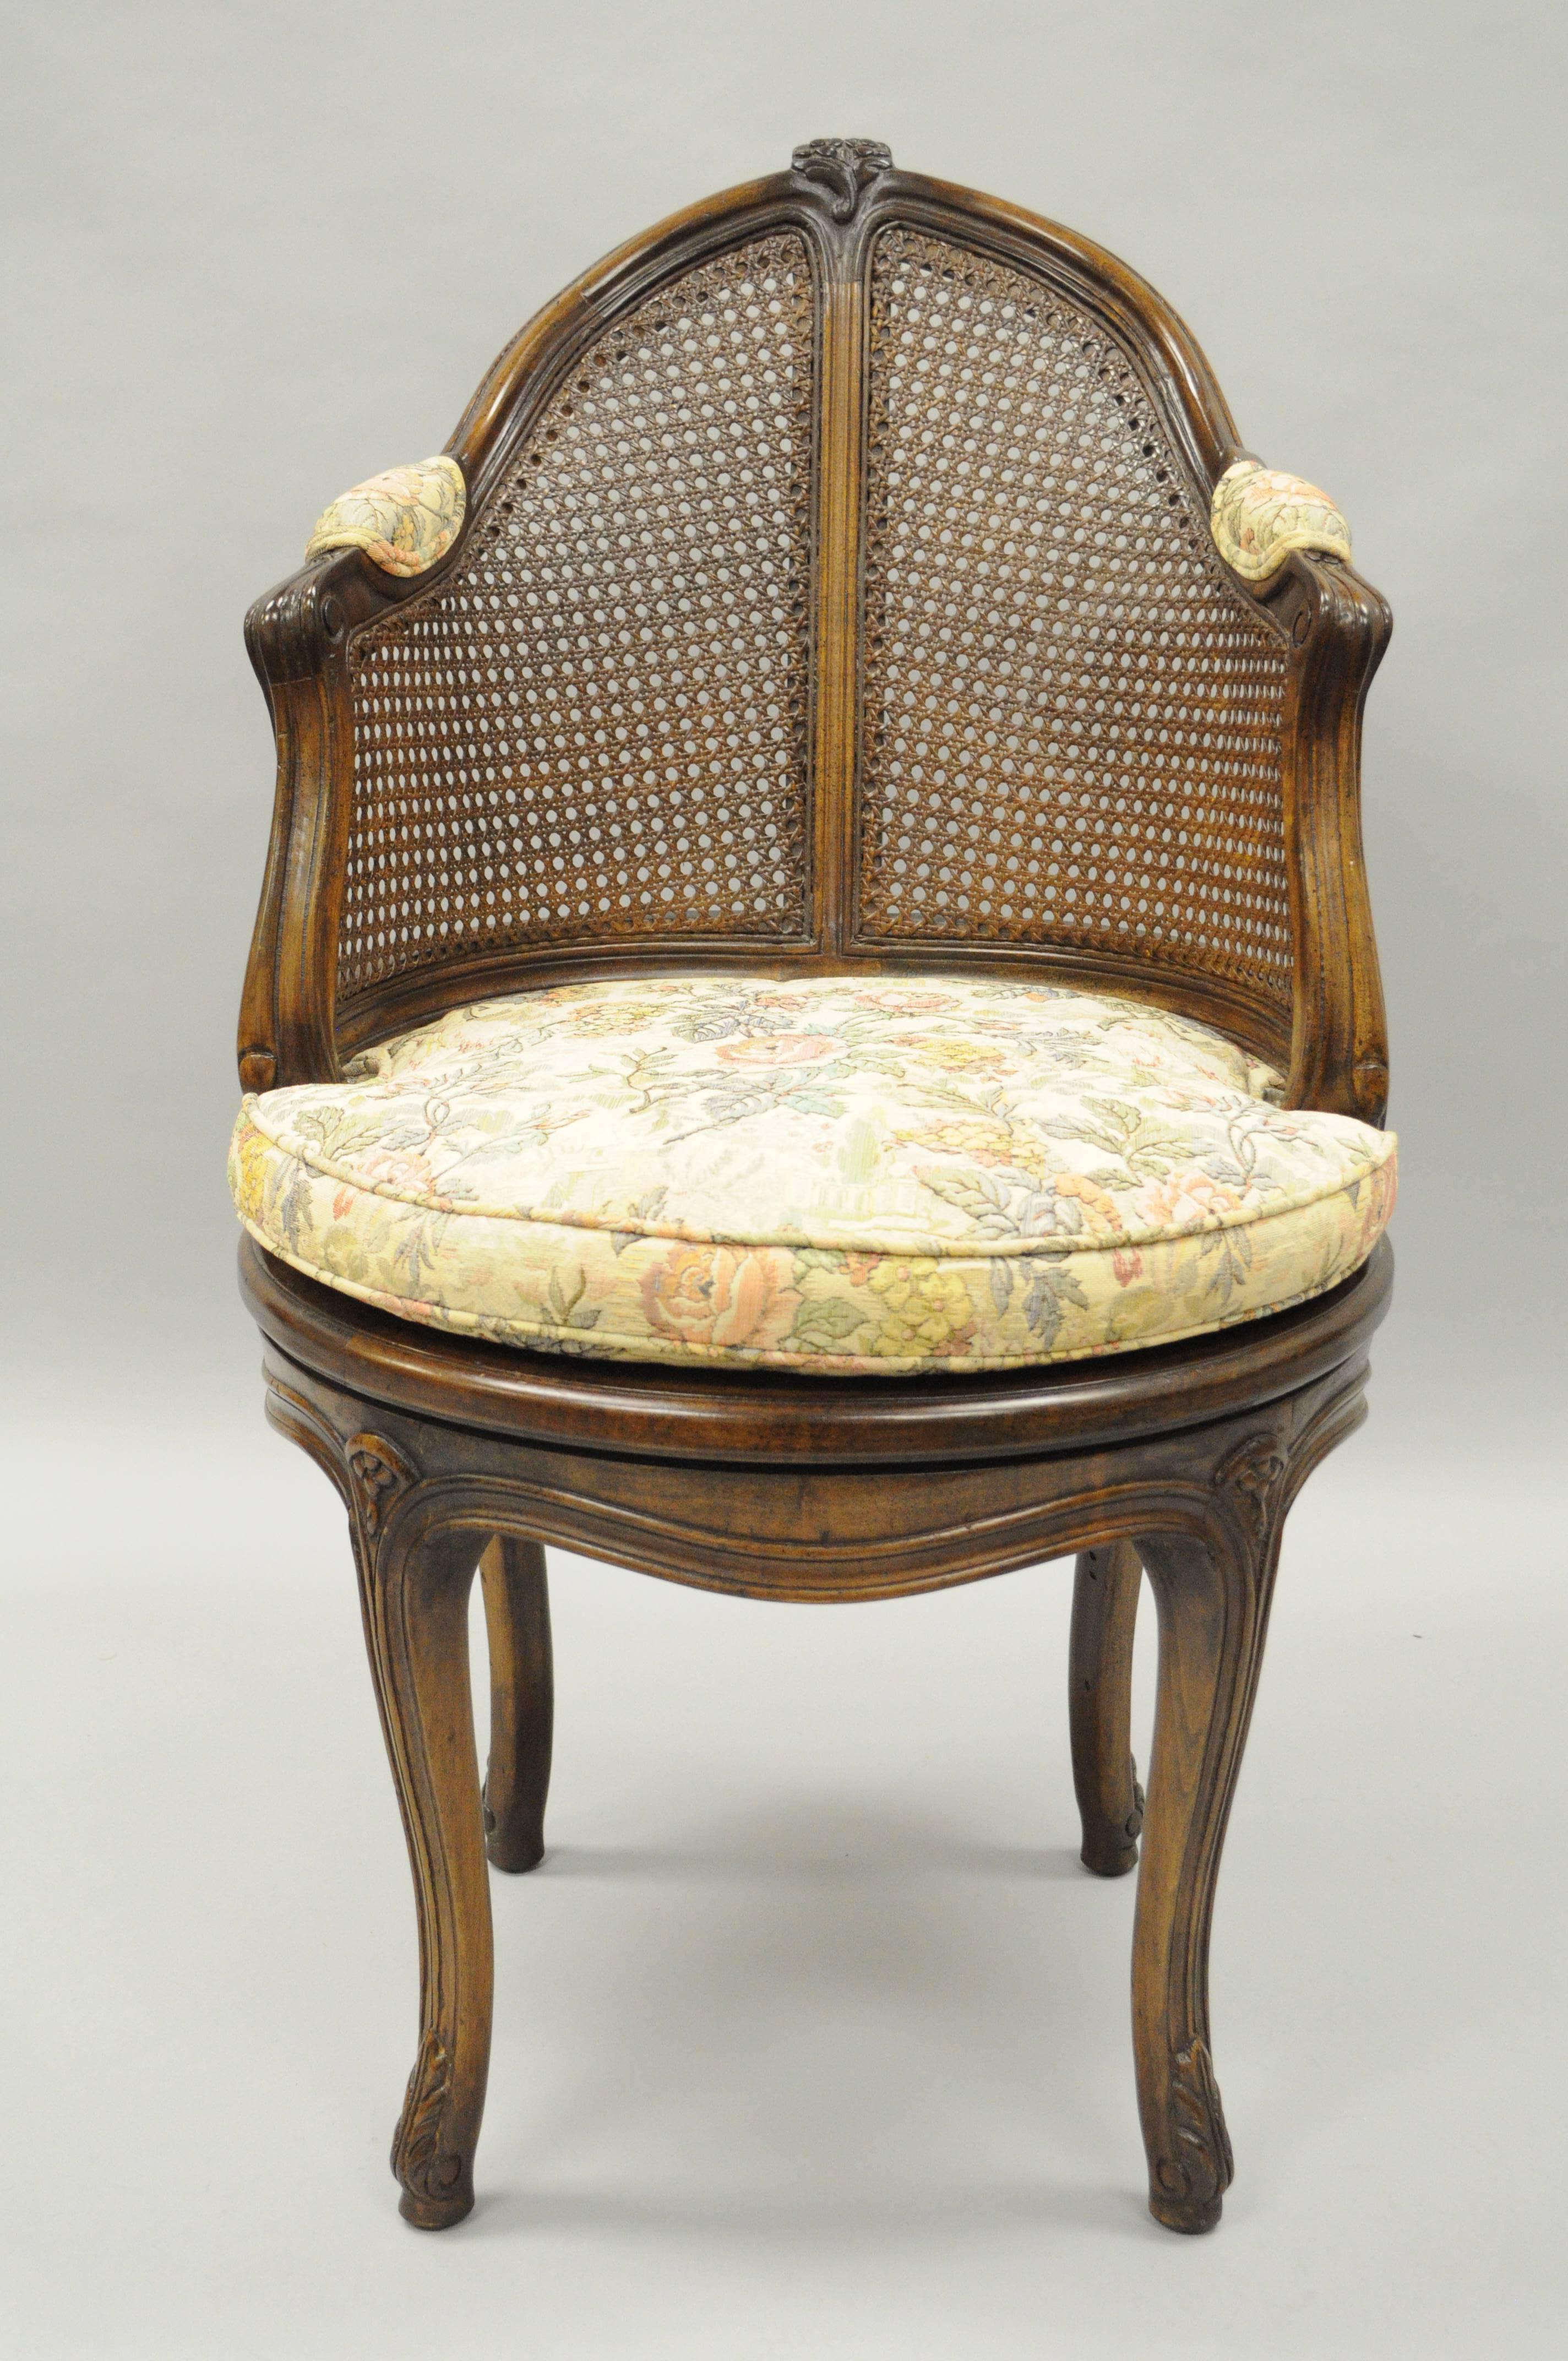 Vintage French Country / Louis XV style revolving vanity chair or stool. Item features a solid carved wood frame, shapely cabriole legs terminating at carved feet, cane back and seat, loose cushion, upholstered armrests, floral carved pediment and